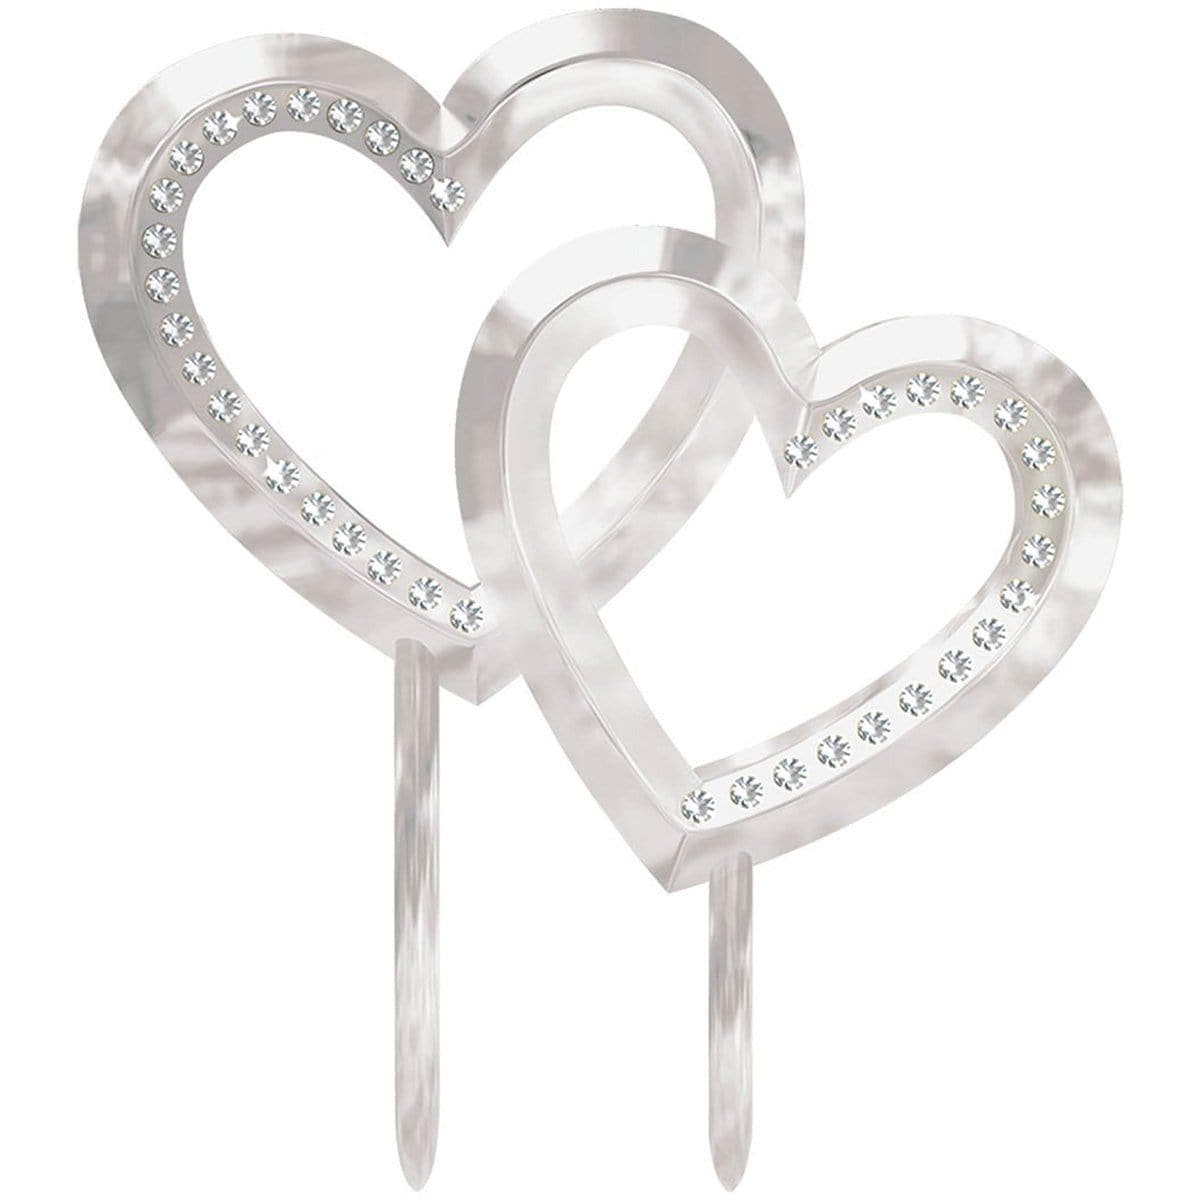 Buy Wedding Cake Topper - Double Hearts 5 in. sold at Party Expert